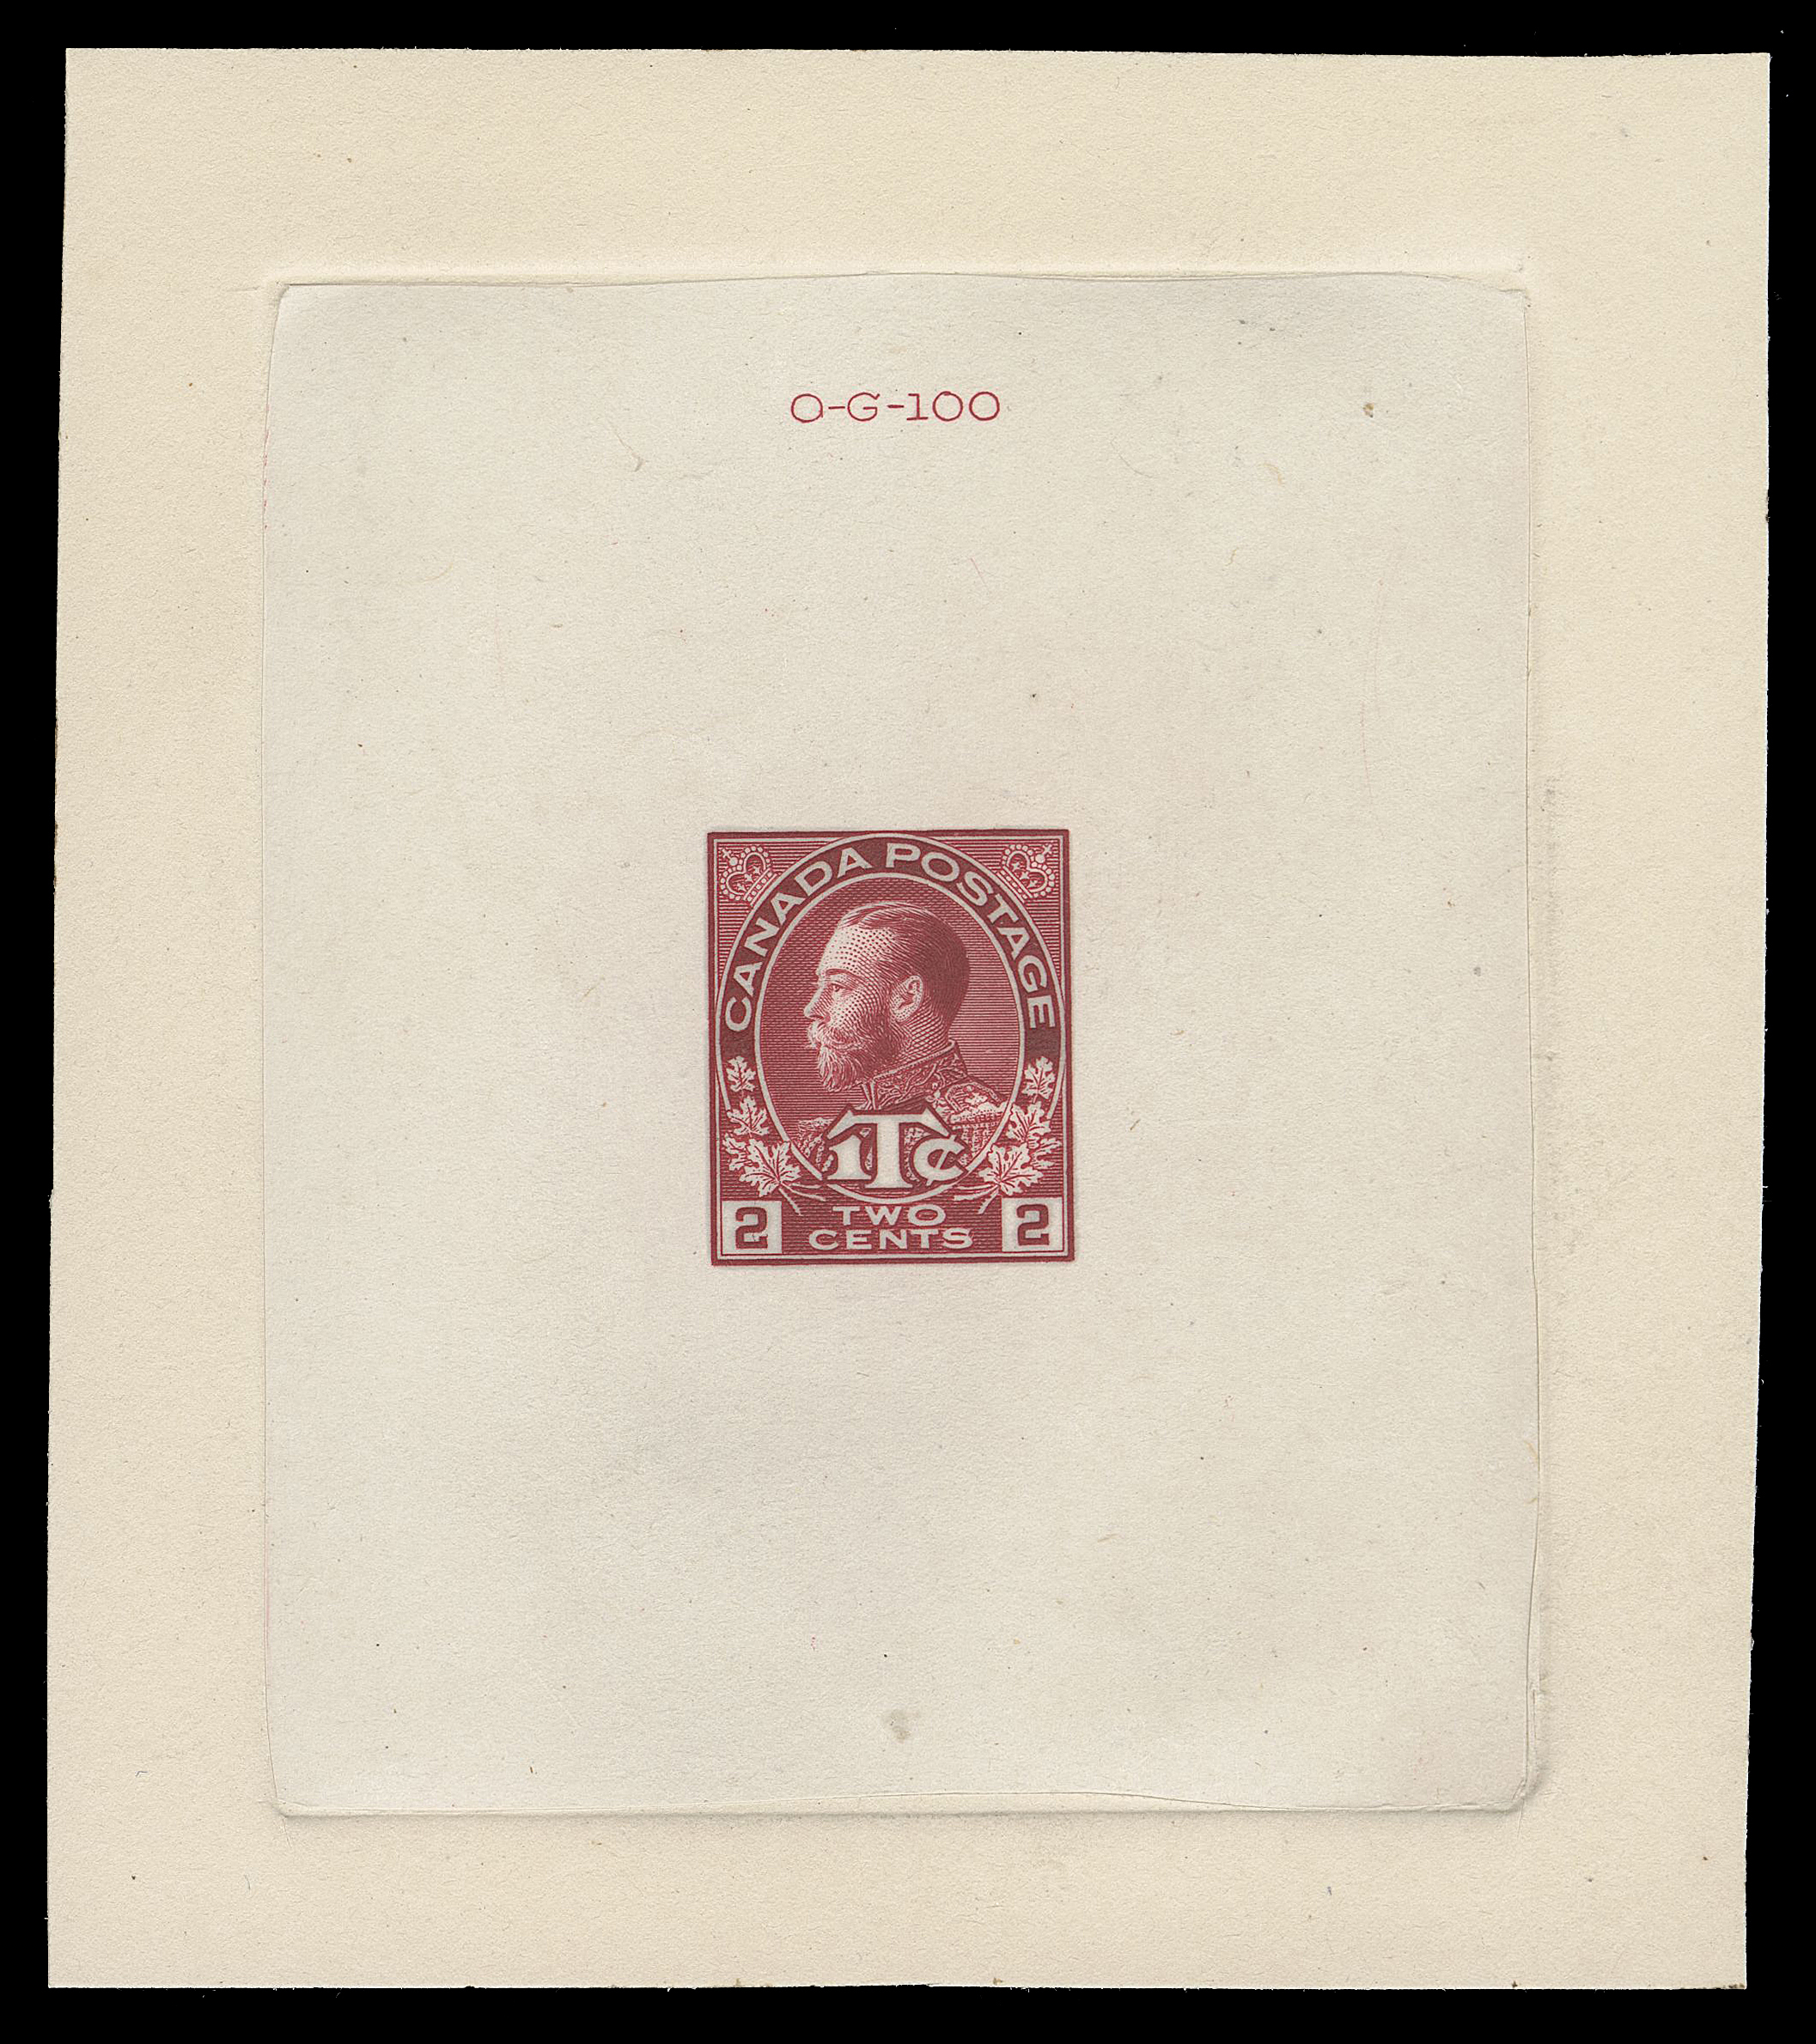 ADMIRAL PROOFS  MR3,Die Proof in the first intended colour on india paper 63 x 75mm, die sunk on slightly larger card 85 x 96mm; colour slightly oxidized, the hardened die with die number "OG-100" above design. Rare as only one die proof of the Die I was offered in the1990 ABNC sale, VF (Minuse & Pratt MR3P1a)